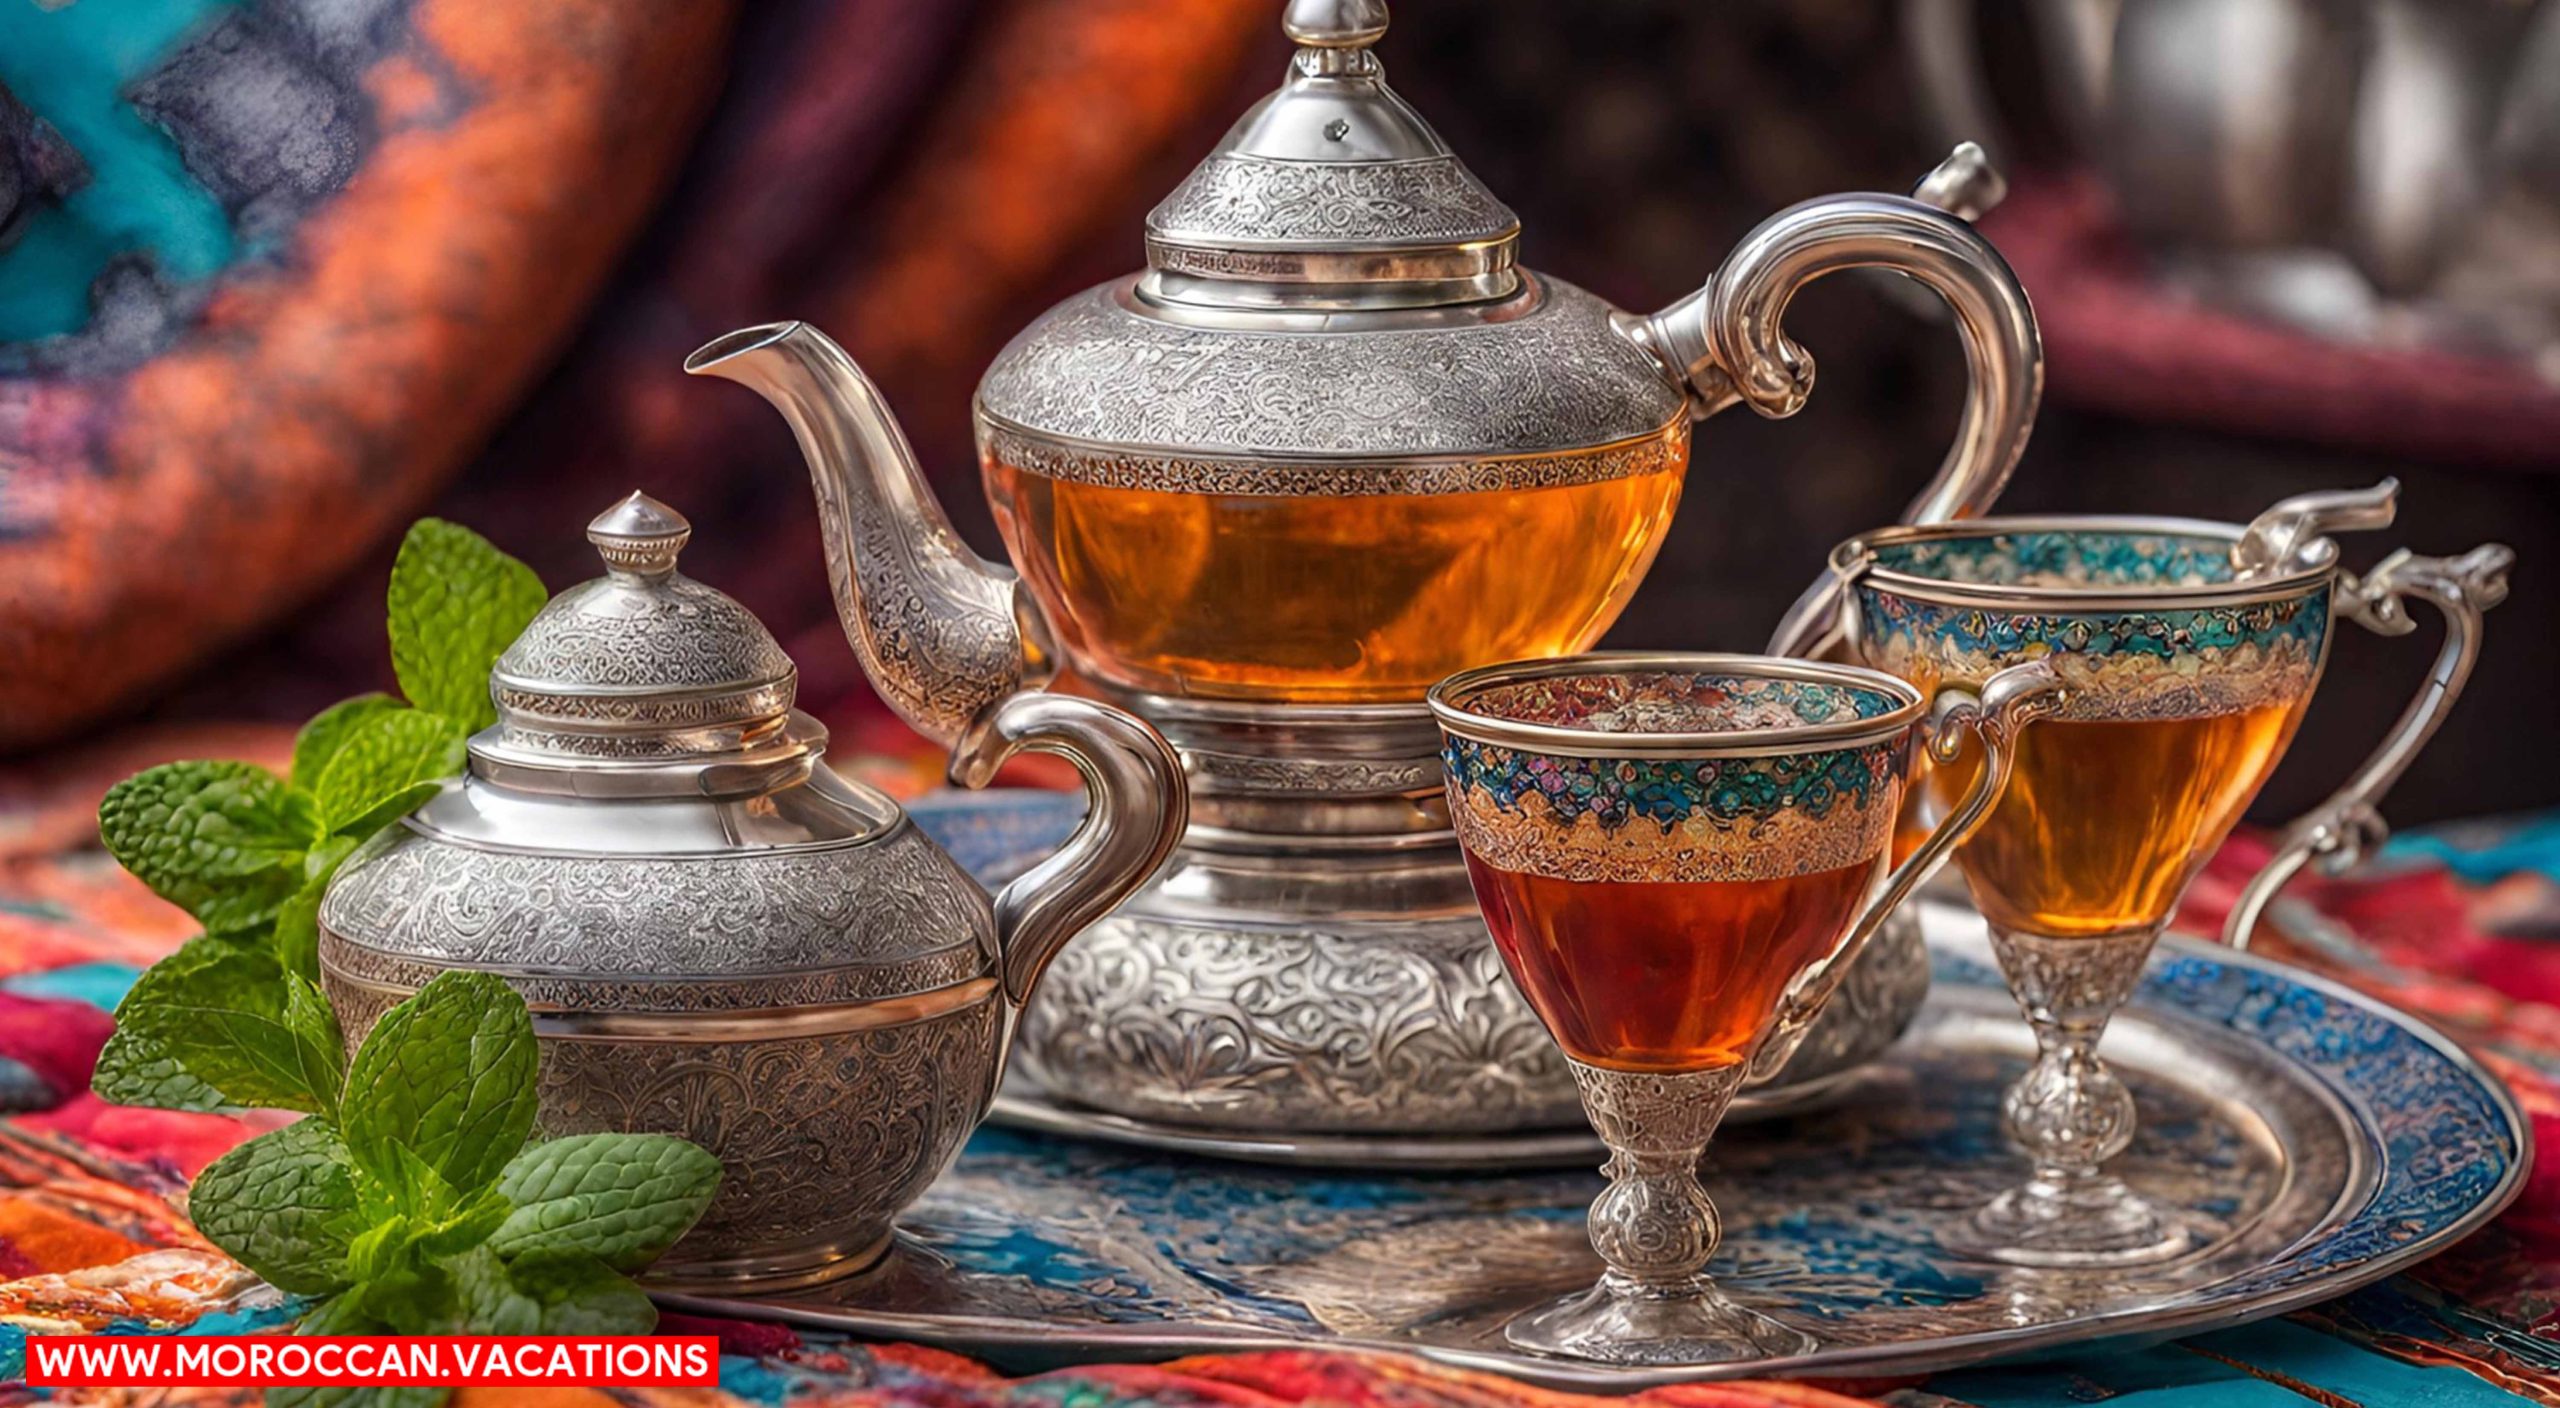 A traditional silver teapot, adorned with intricate engravings, pouring steaming mint tea into ornate glasses.